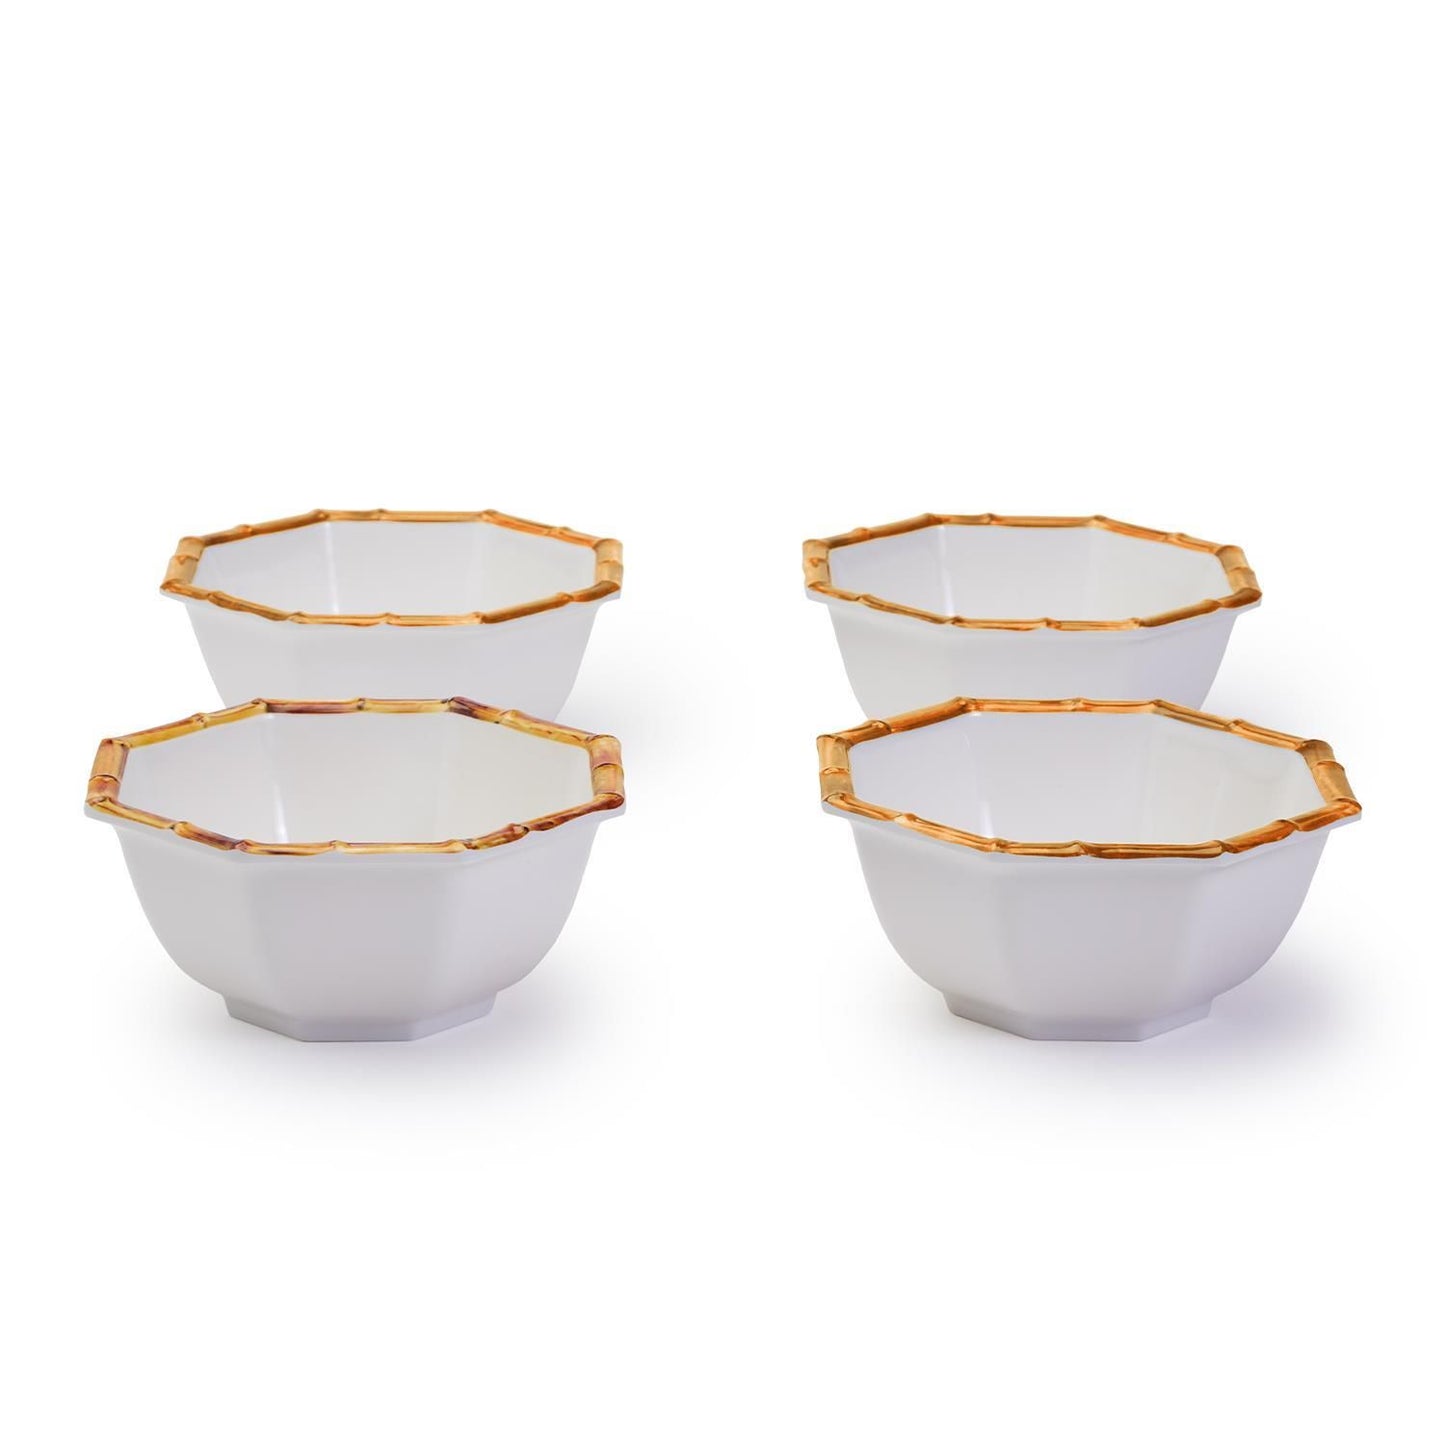 Two's Company Bamboo Touch Set of 4 Octagonal Multipurpose Individual Bowls